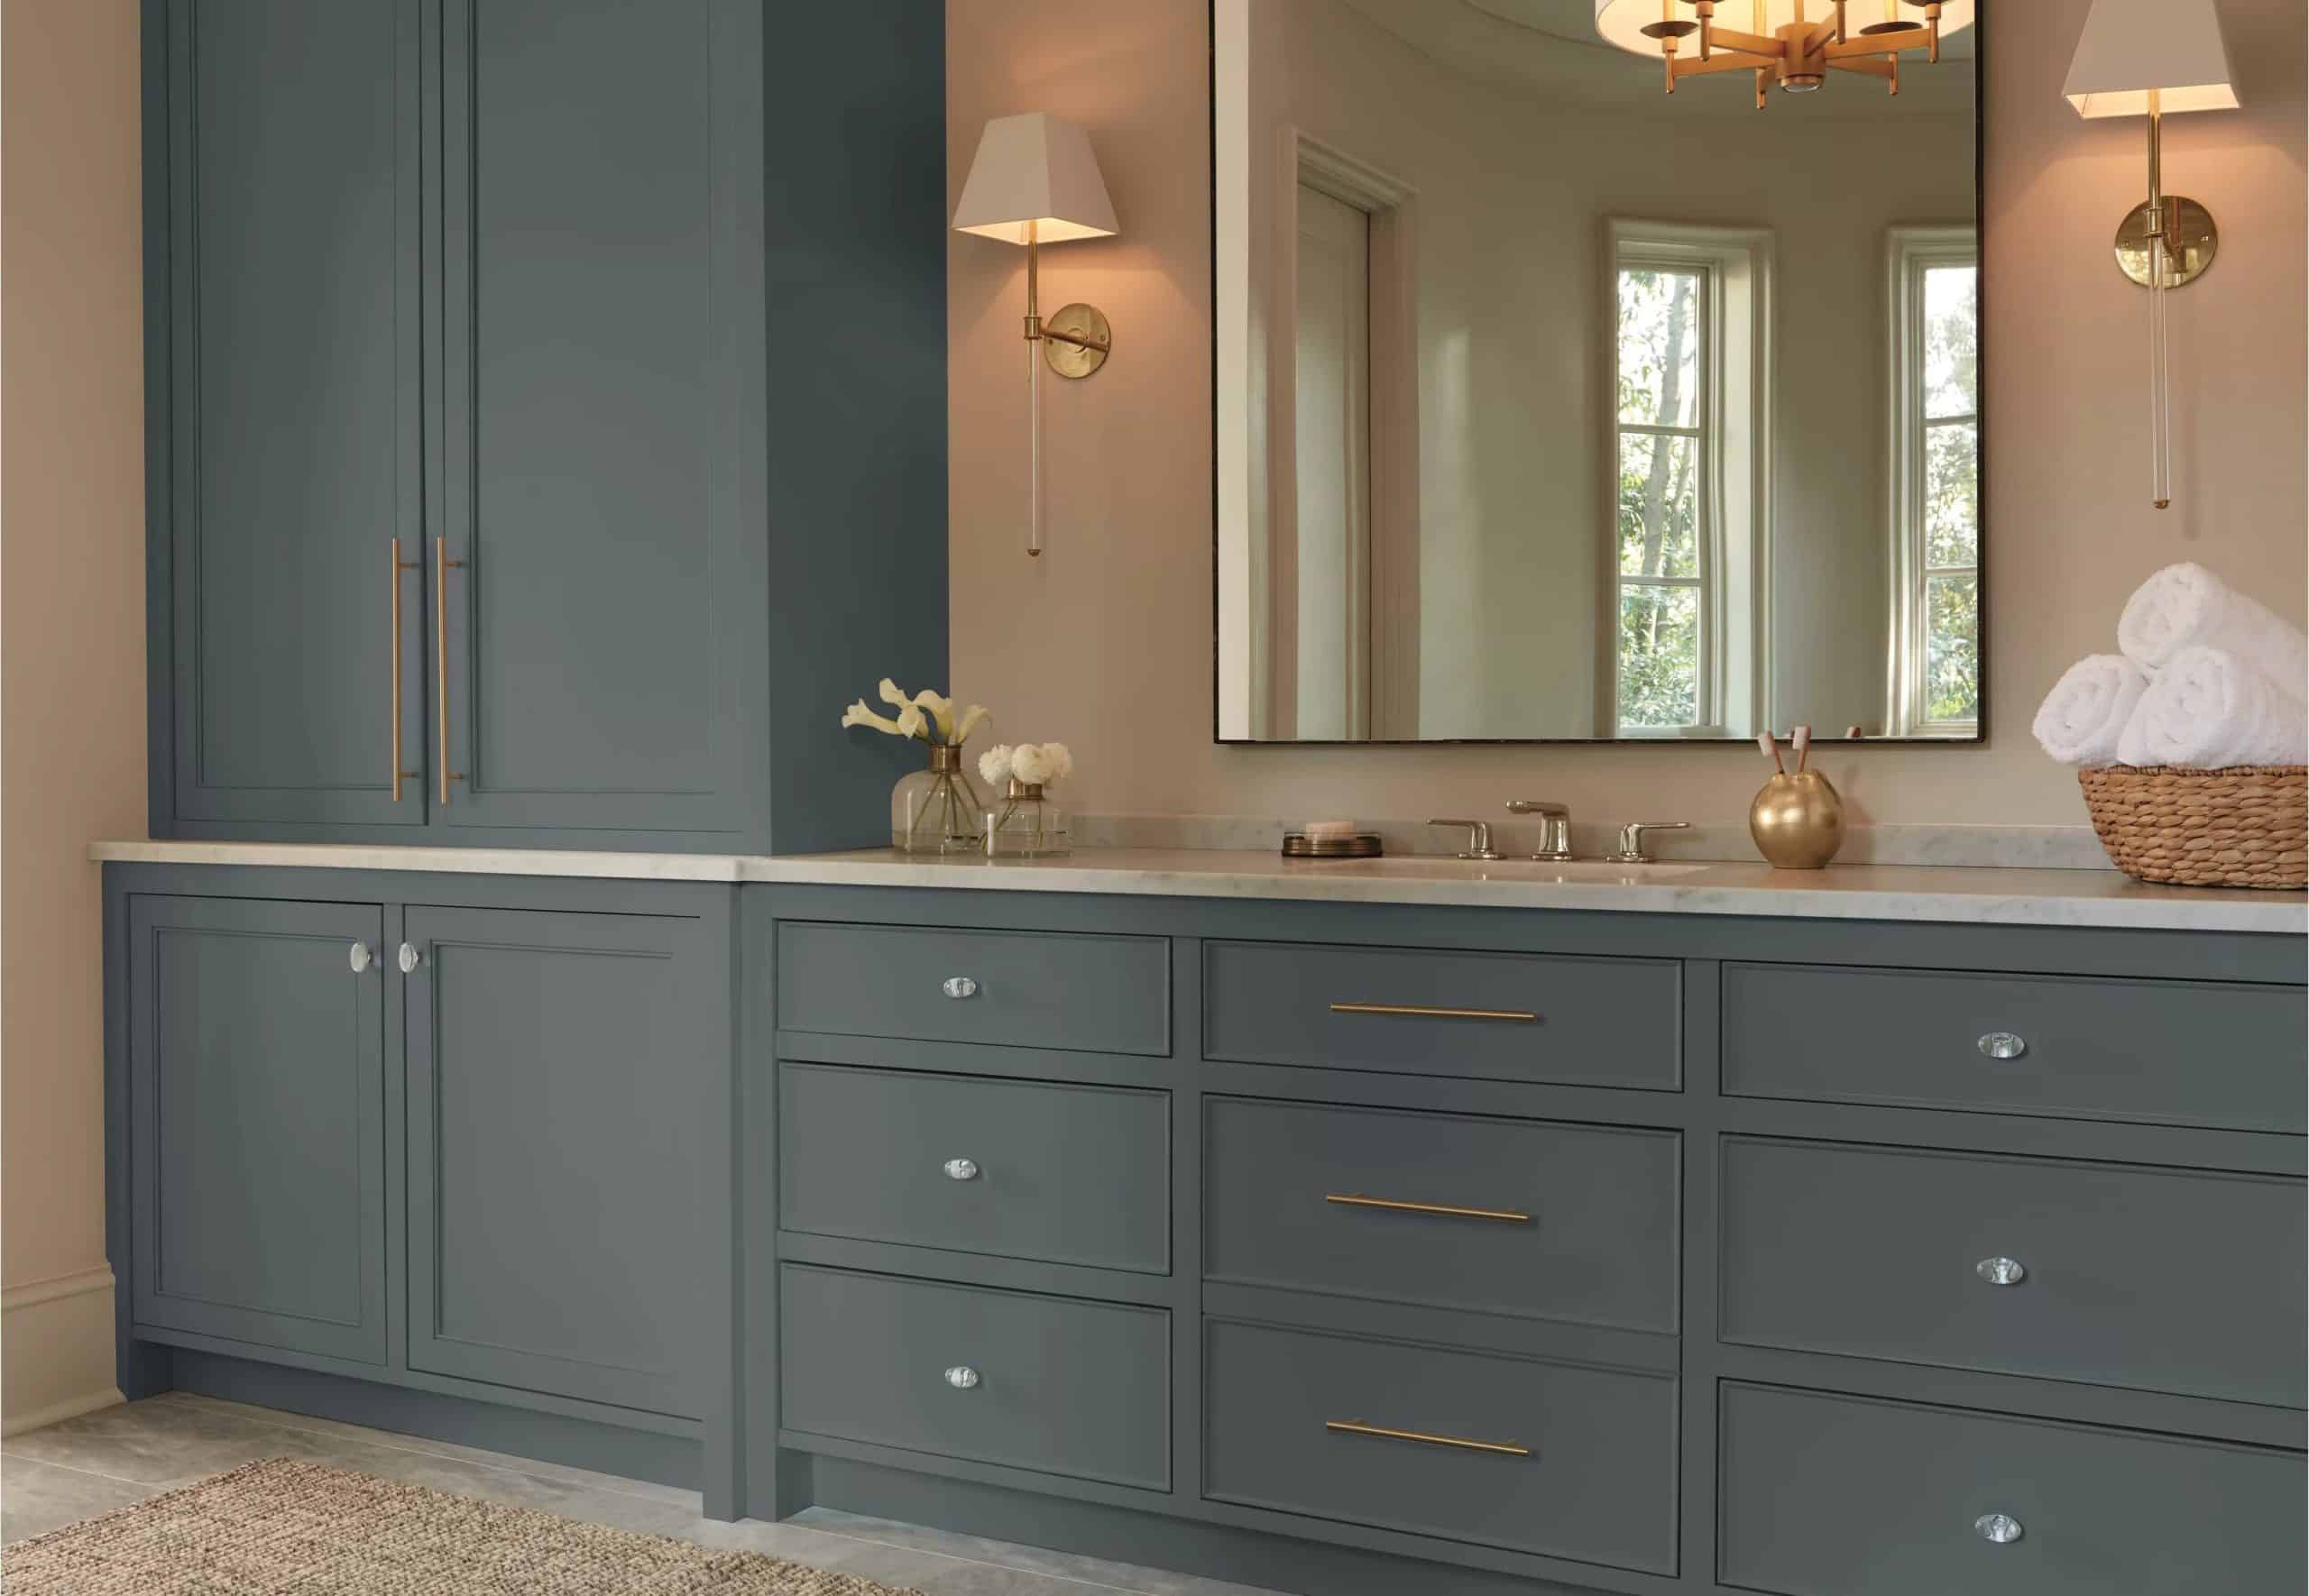 Brassy Hardware Goes Well With Bluish Gray Cabinets